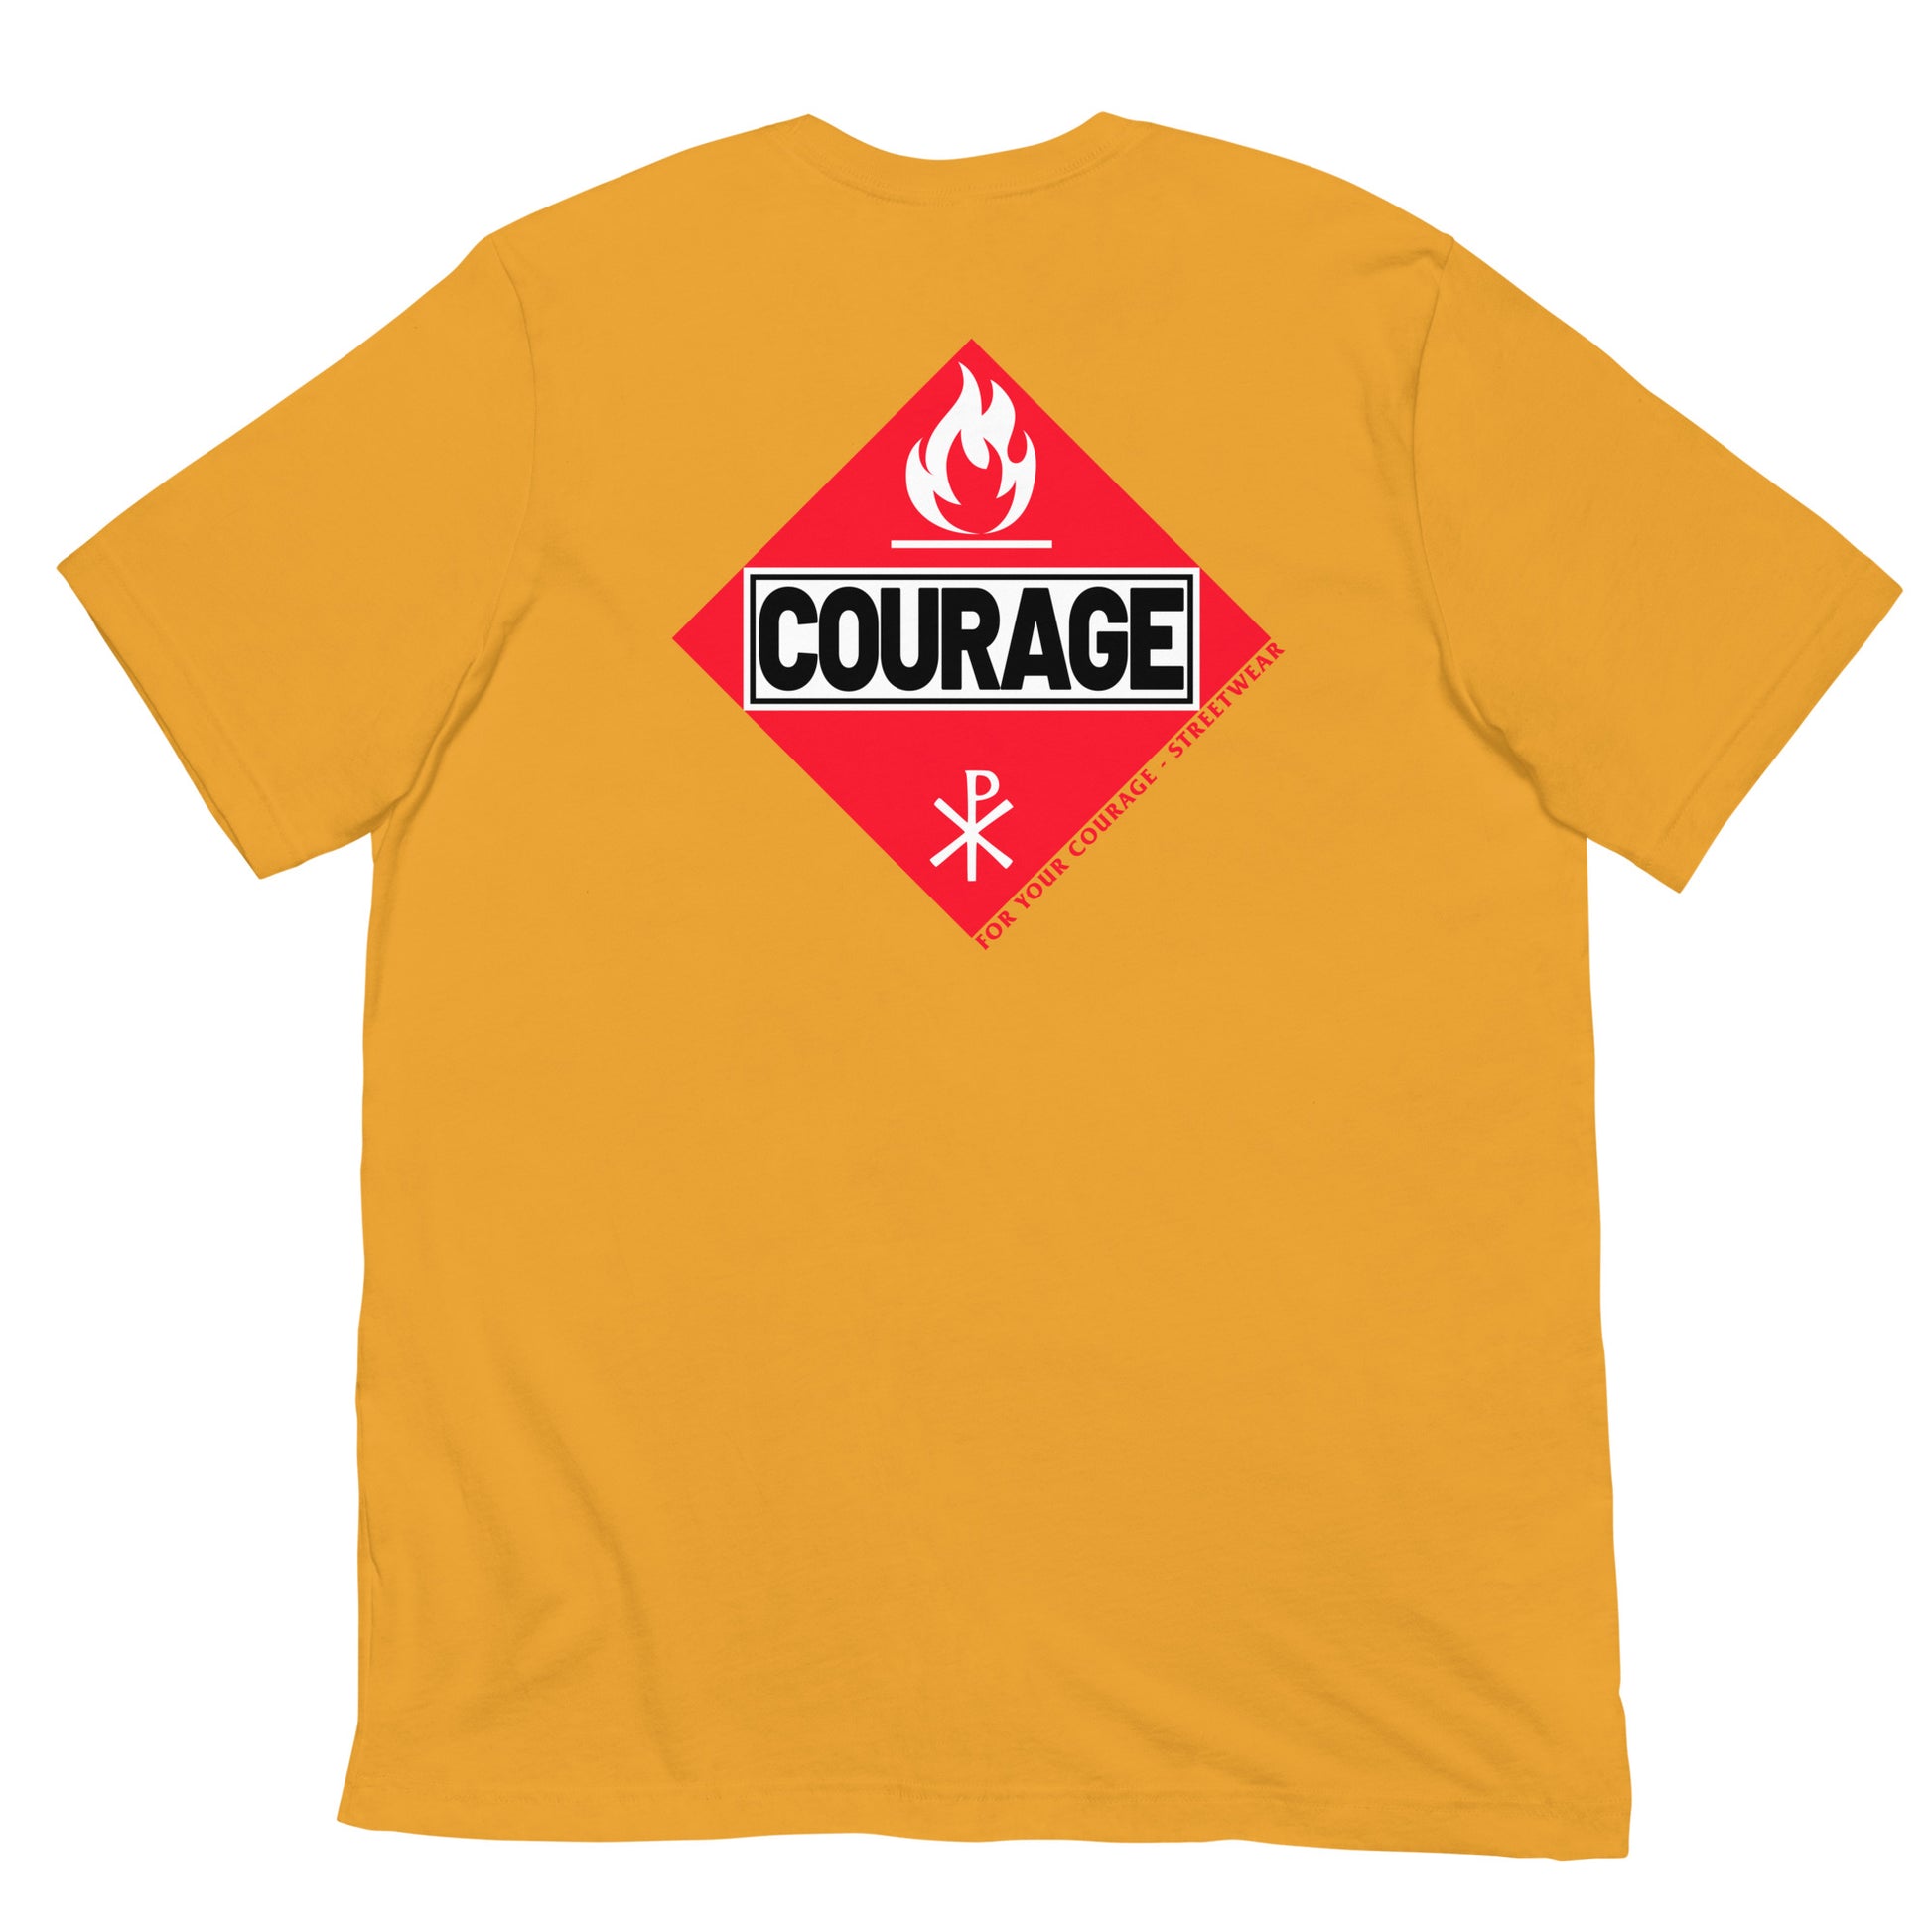 Courage Under Fire - For Your Courage